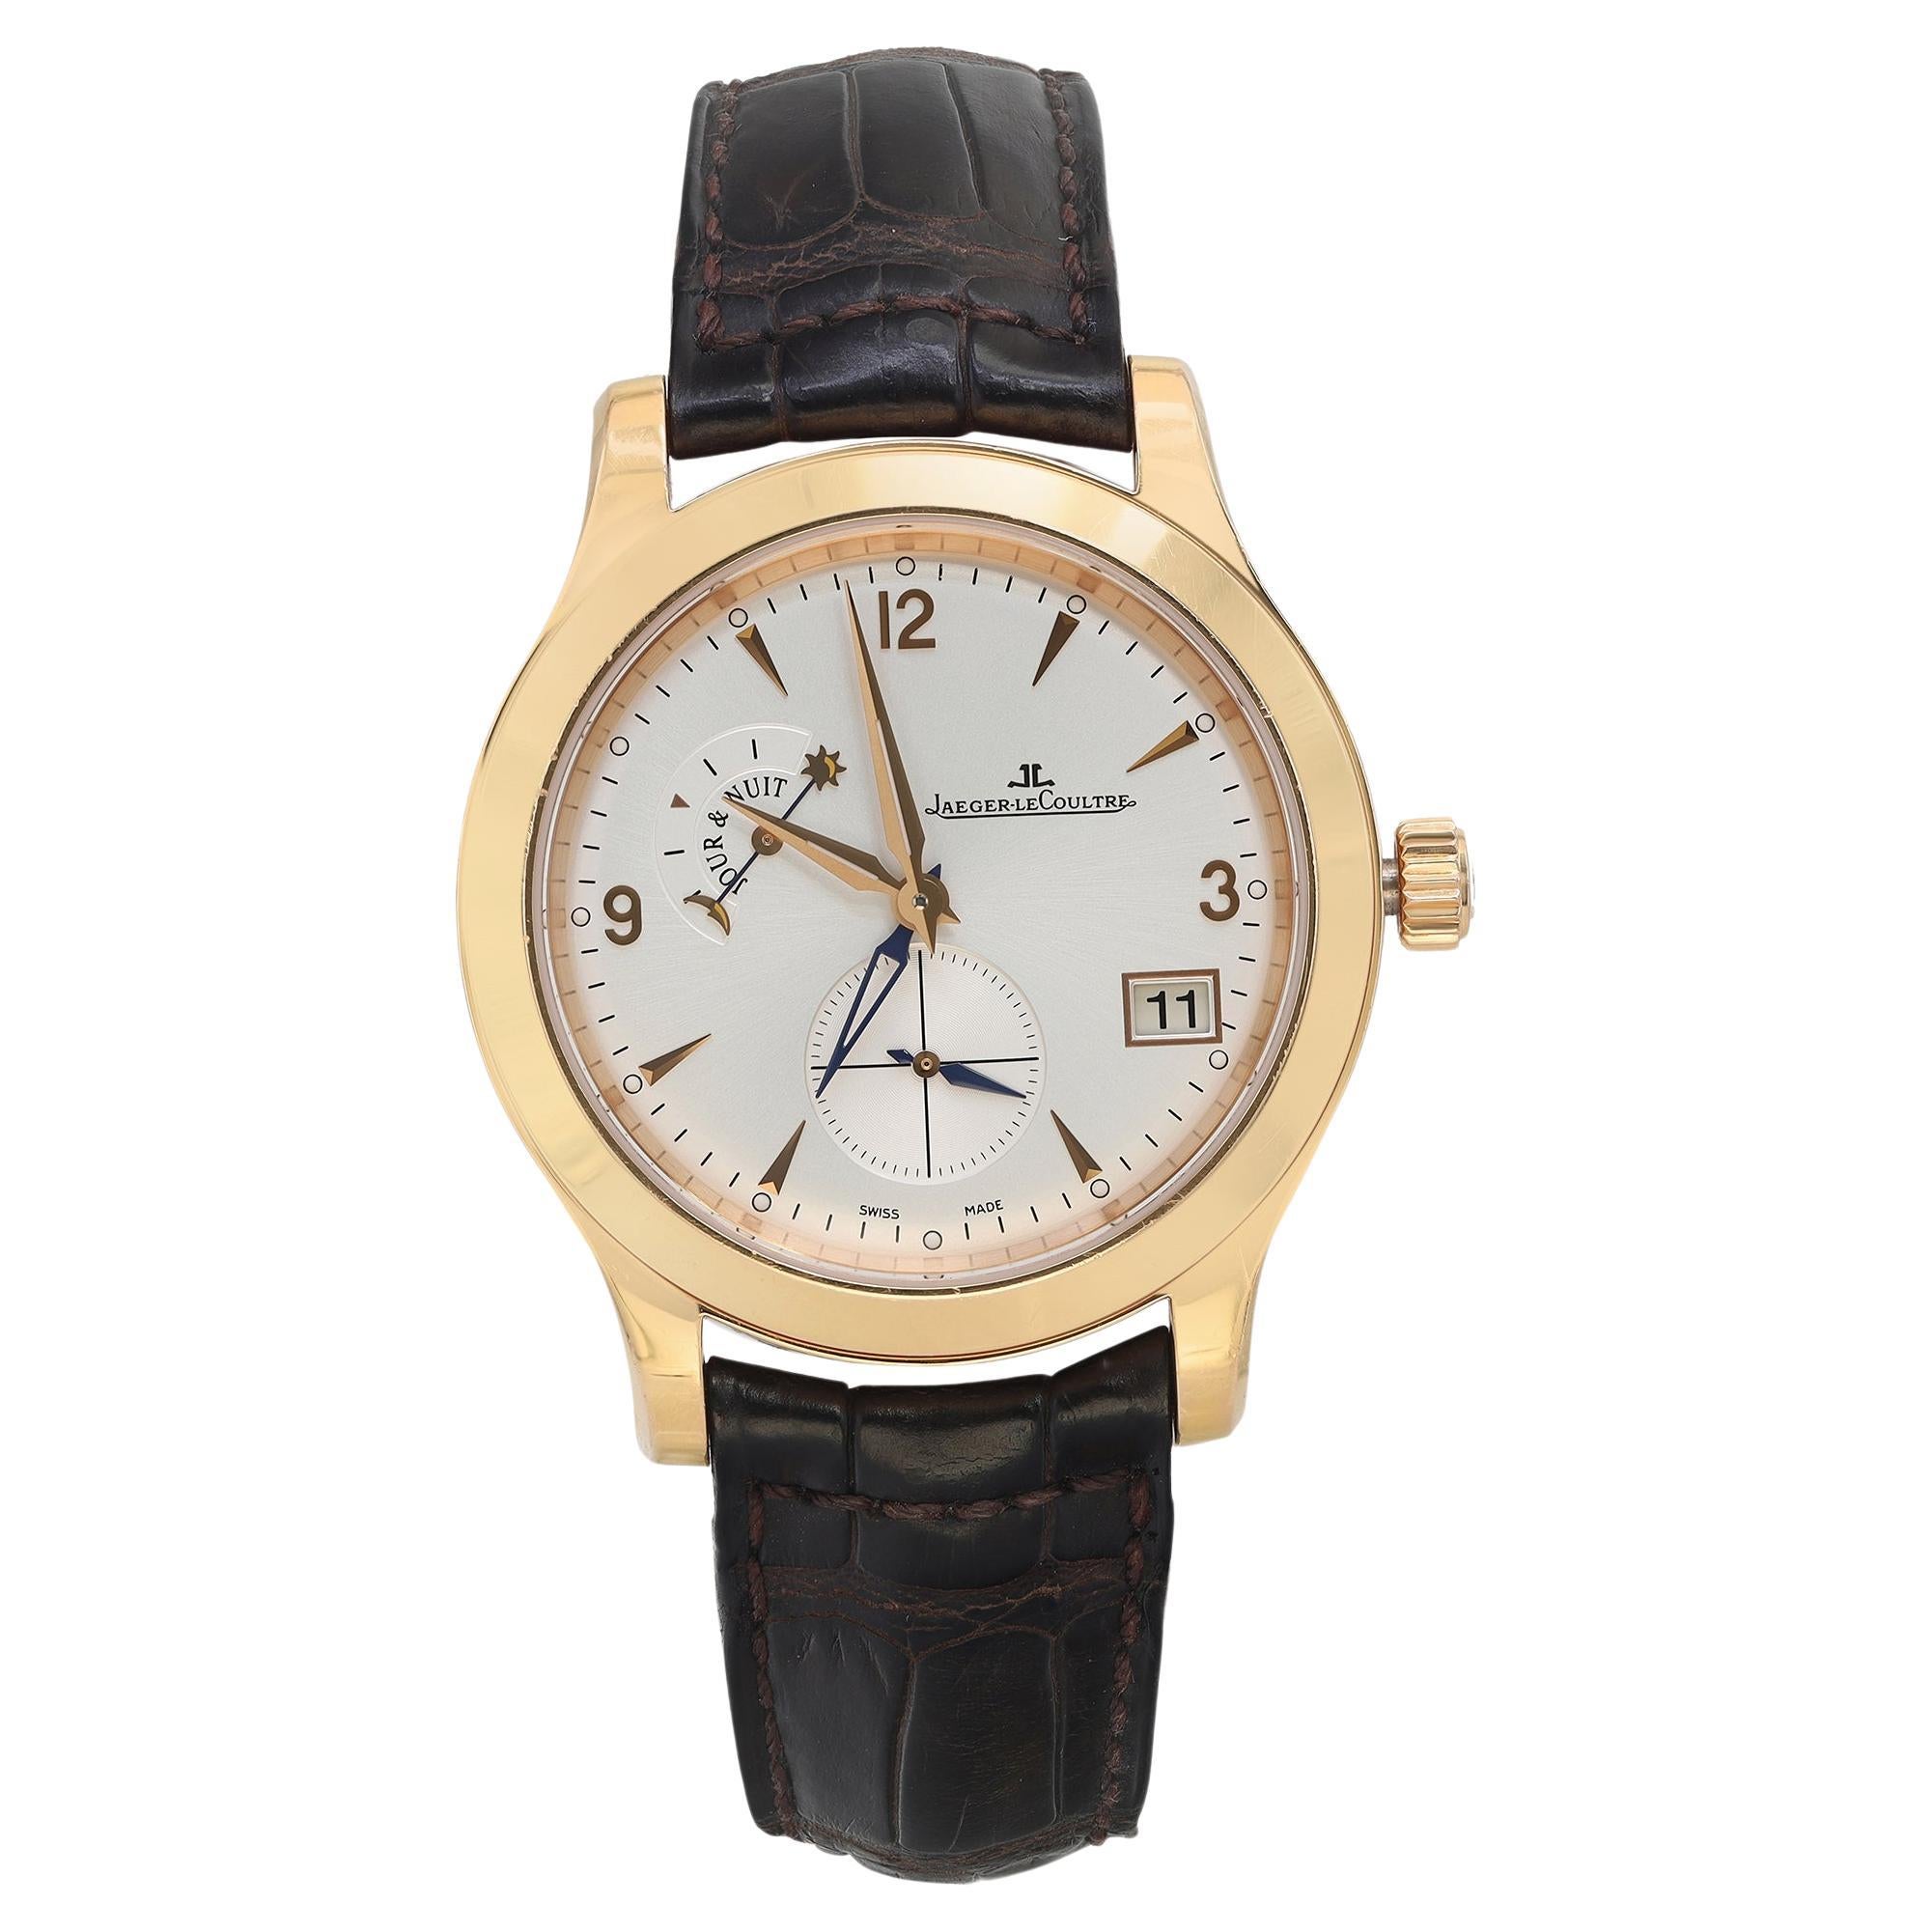 Jaeger-LeCoultre Master Control Hometime 18k Gold Silver Dial Watch Q1622420